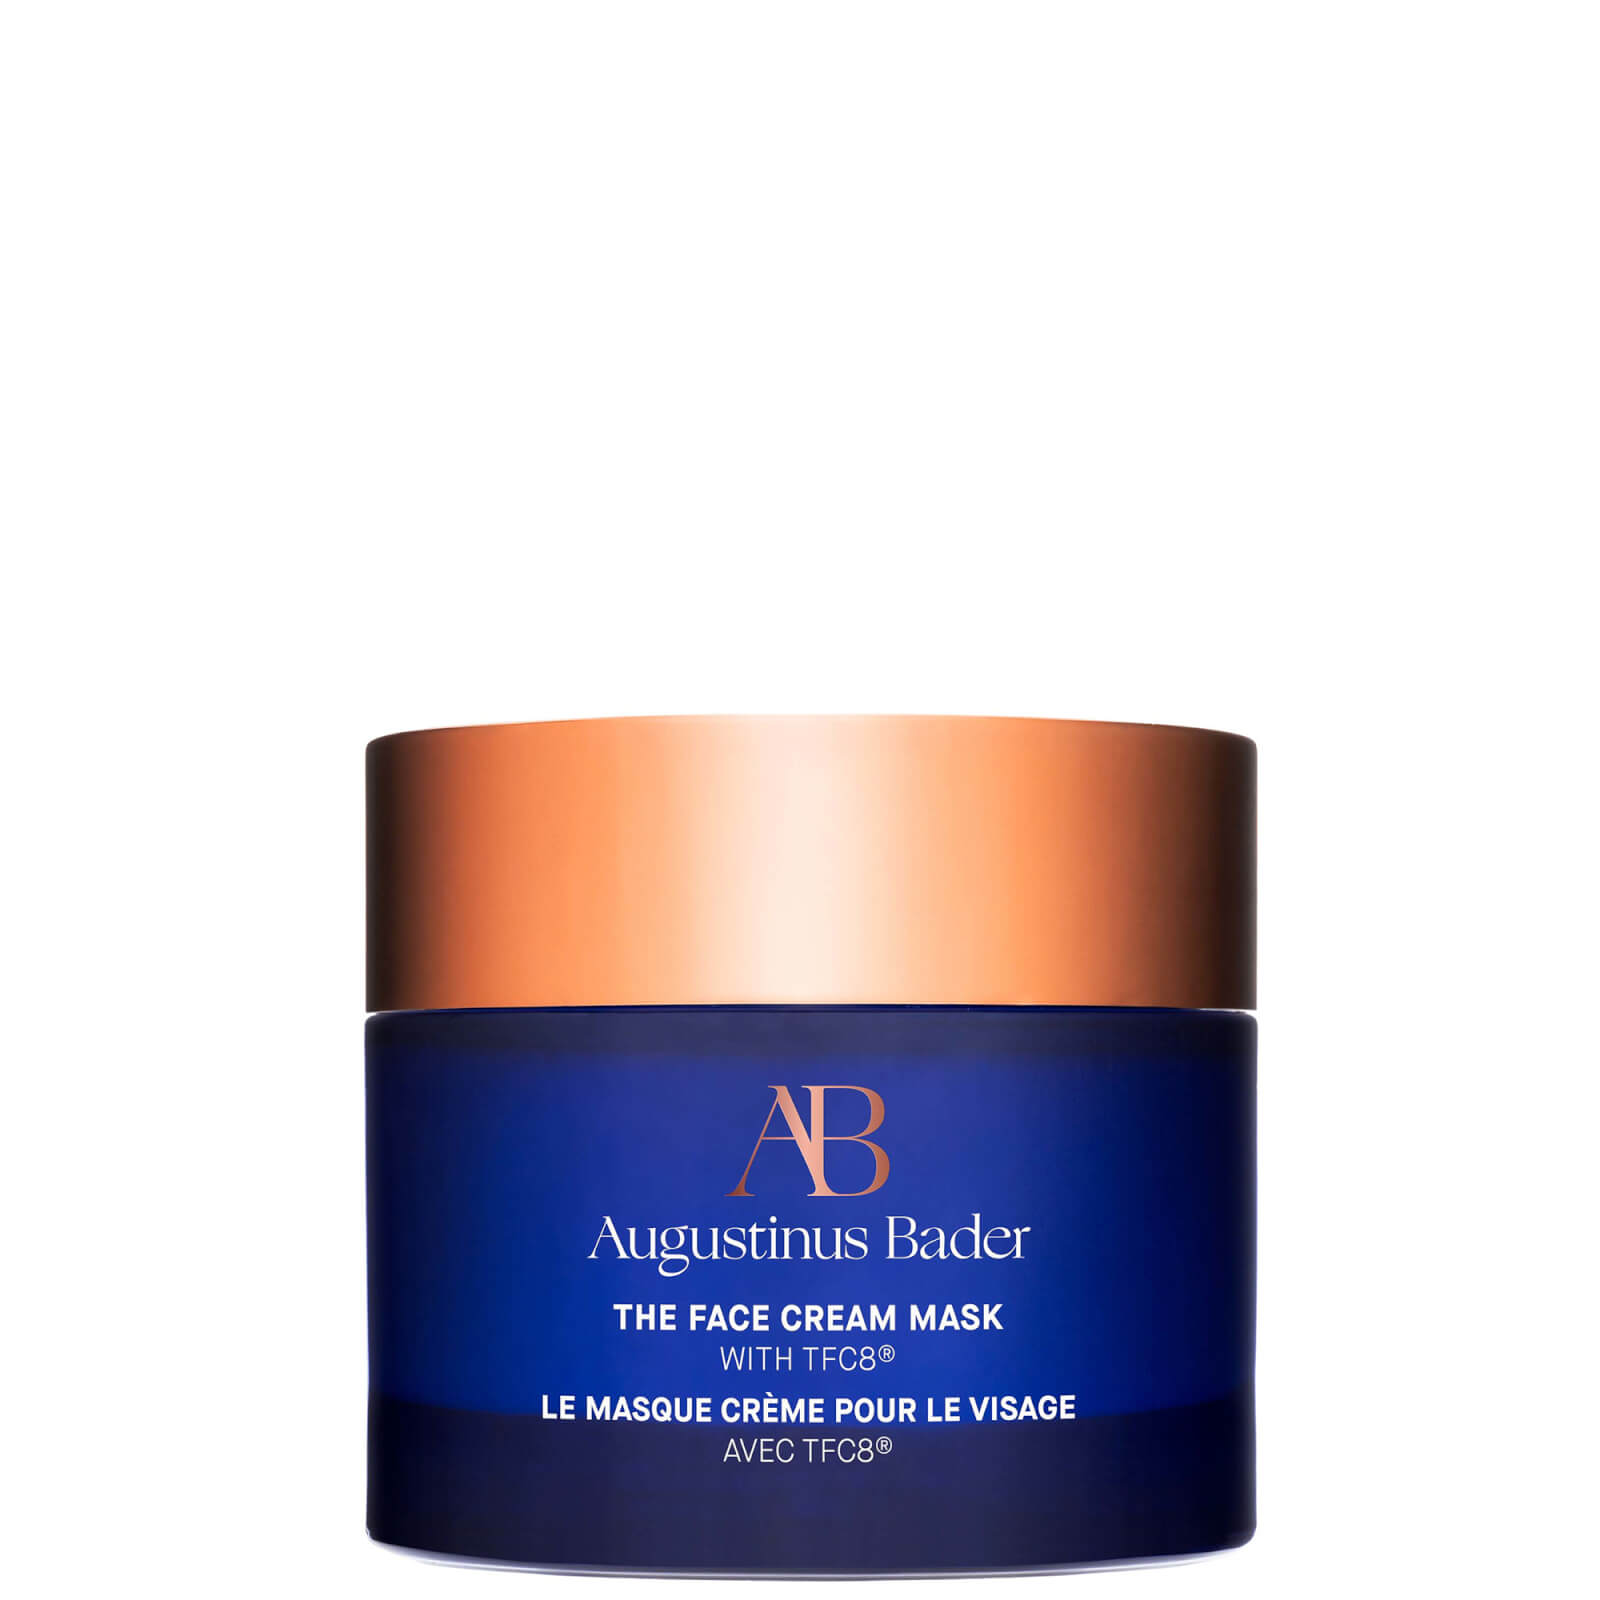 Augustinus Bader The Face Cream Mask 50ml (Various Options) - 50ml